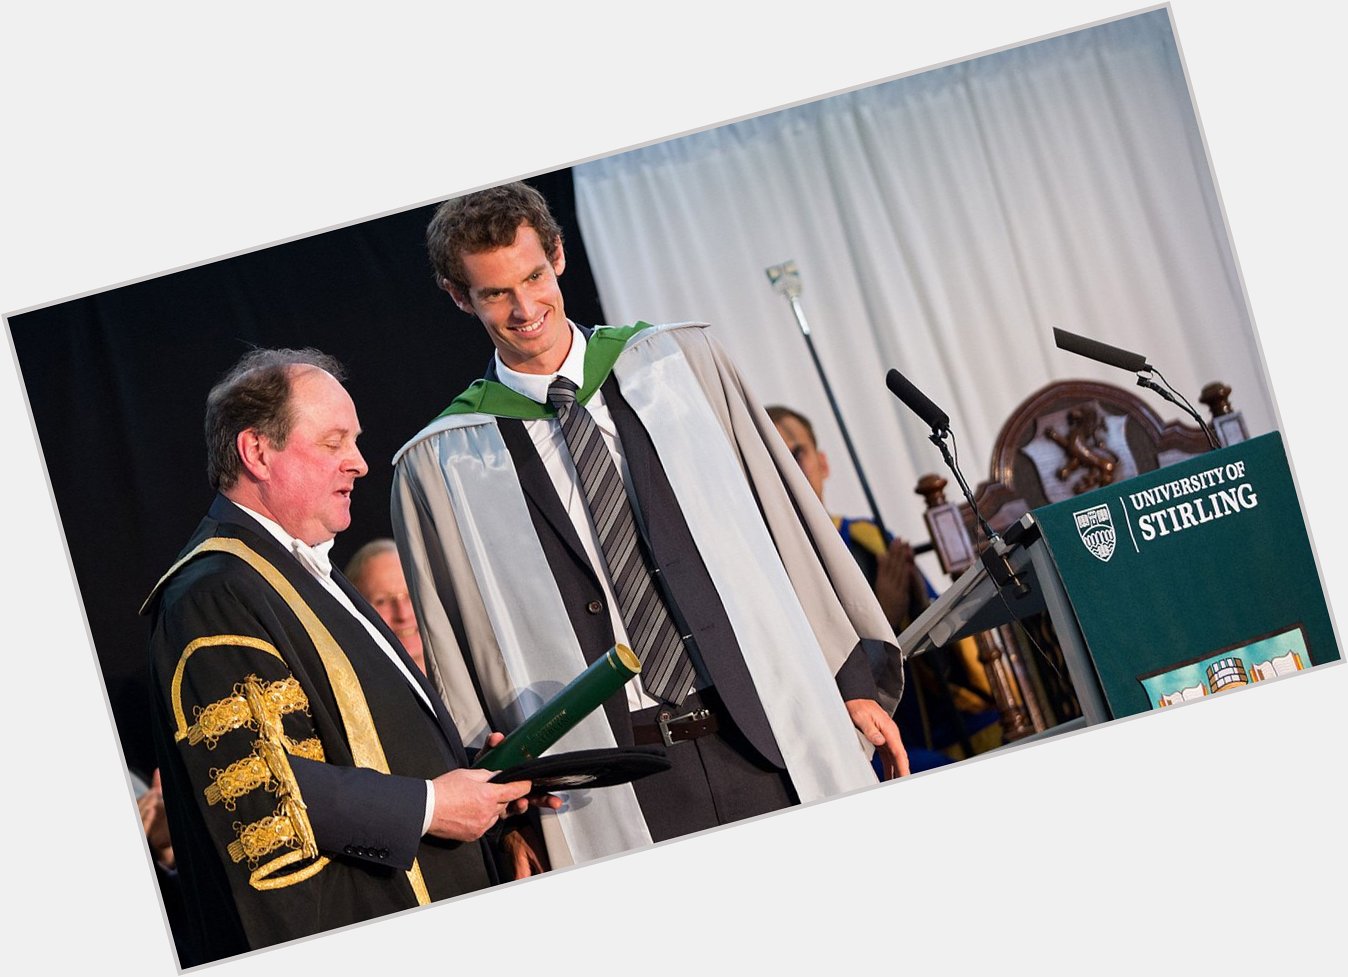 Happy birthday to our friend and UofS Honorary Graduate,  